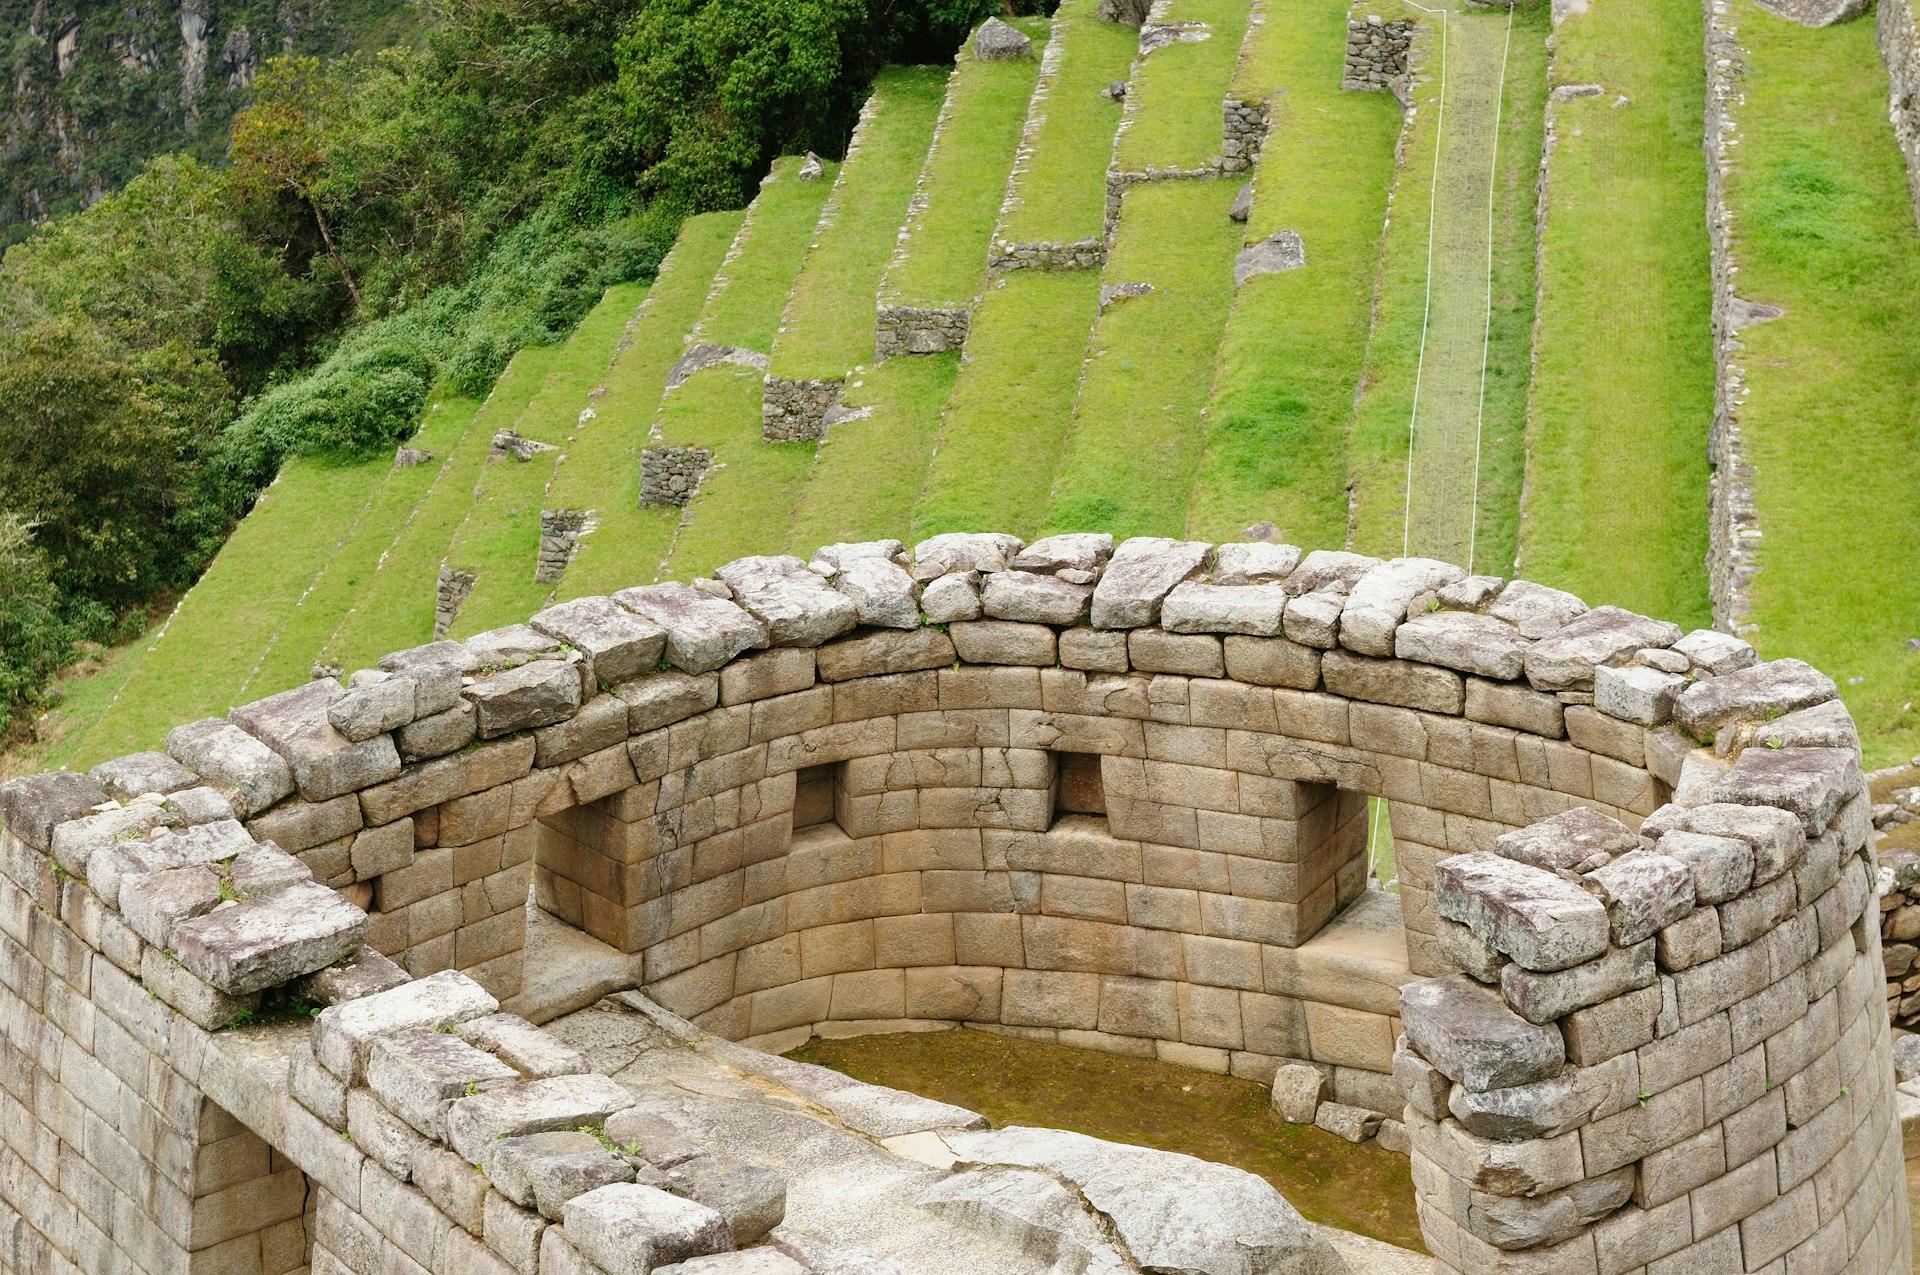 The stone-built. Temple of the Sun at Machu Picchu. 